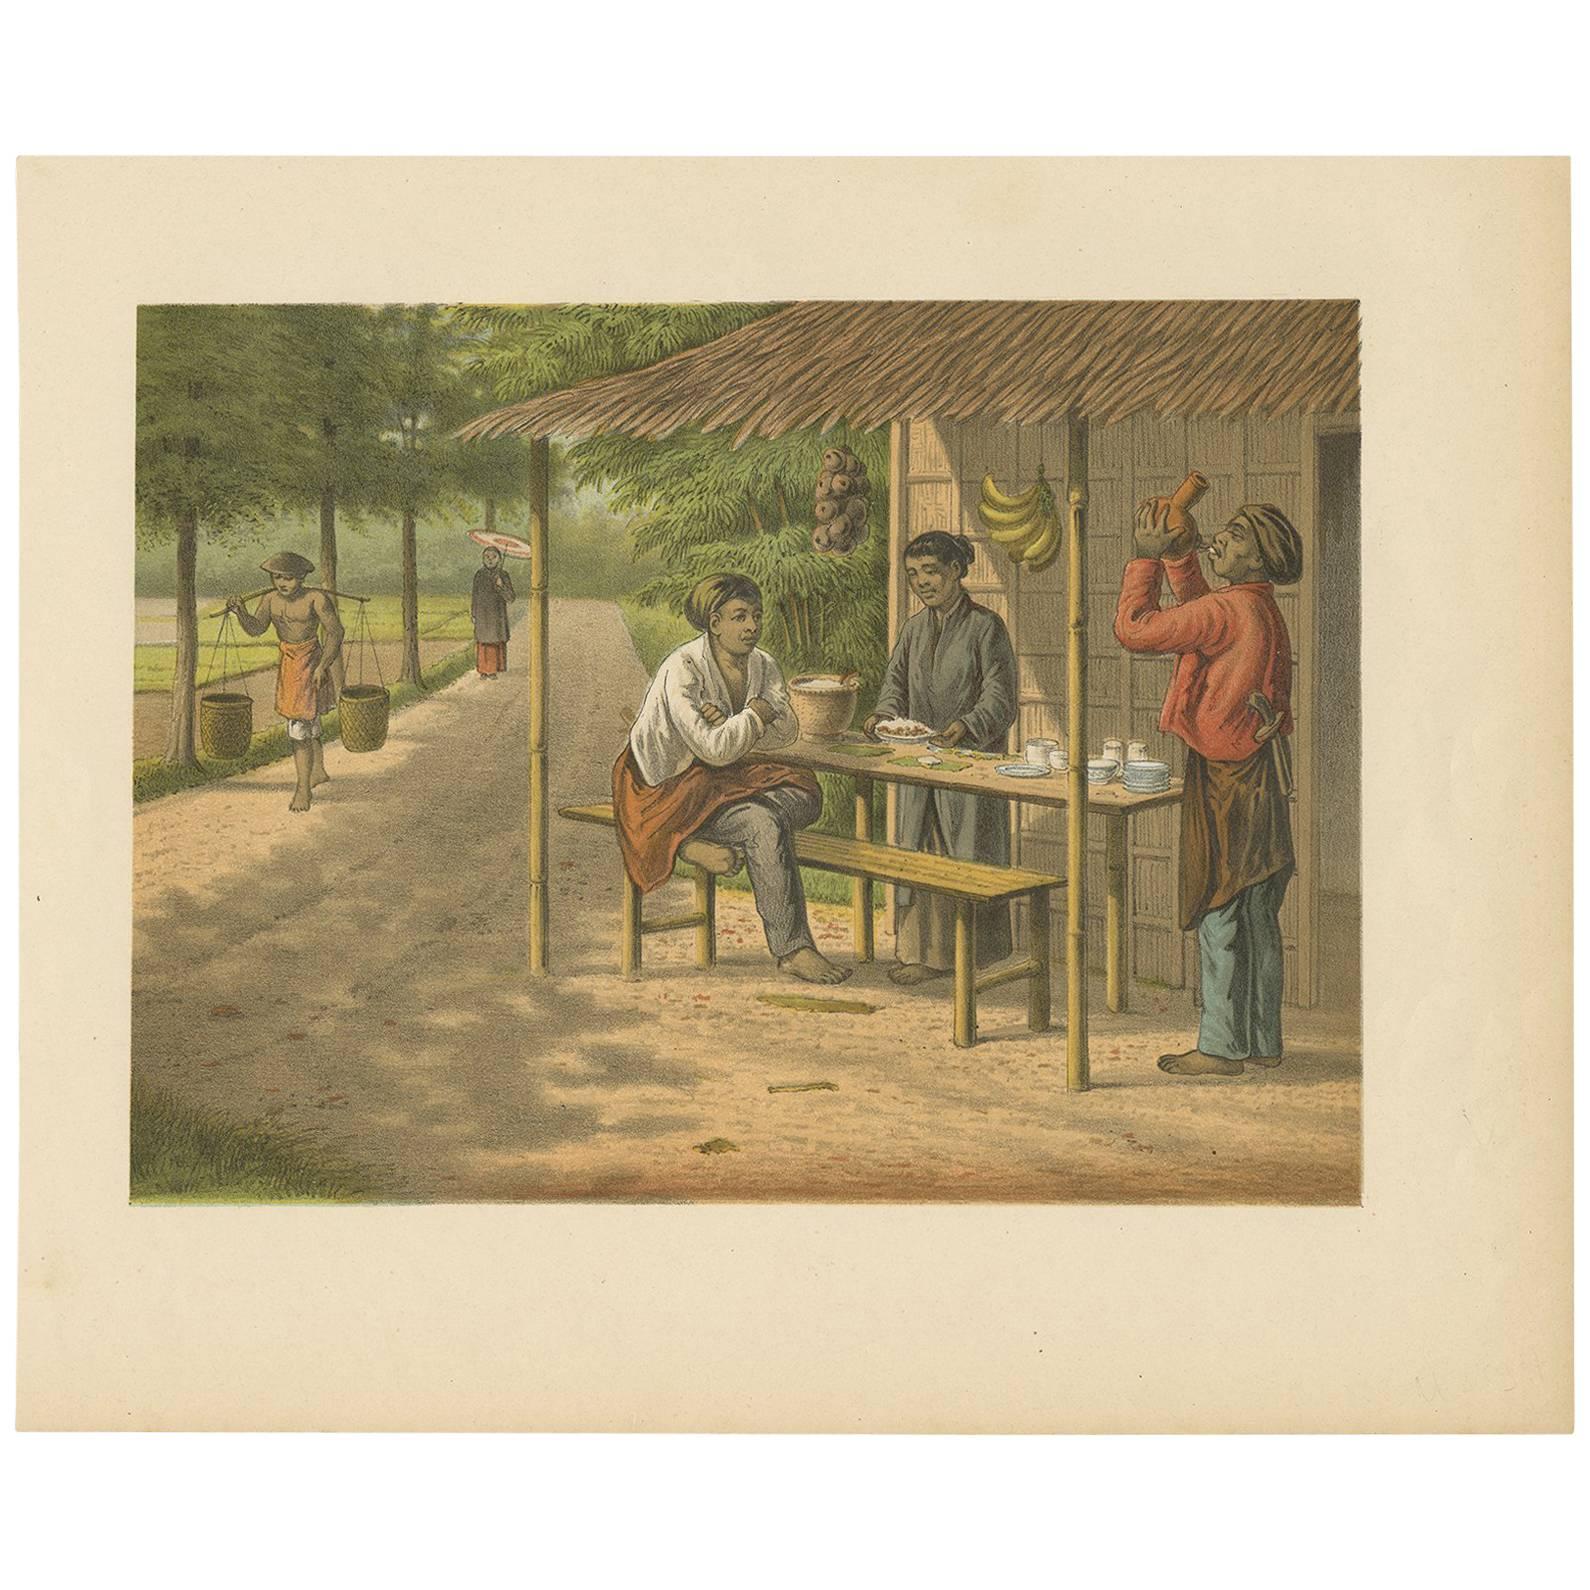 Antique Print of a Warong with Native People, Java, Indonesia